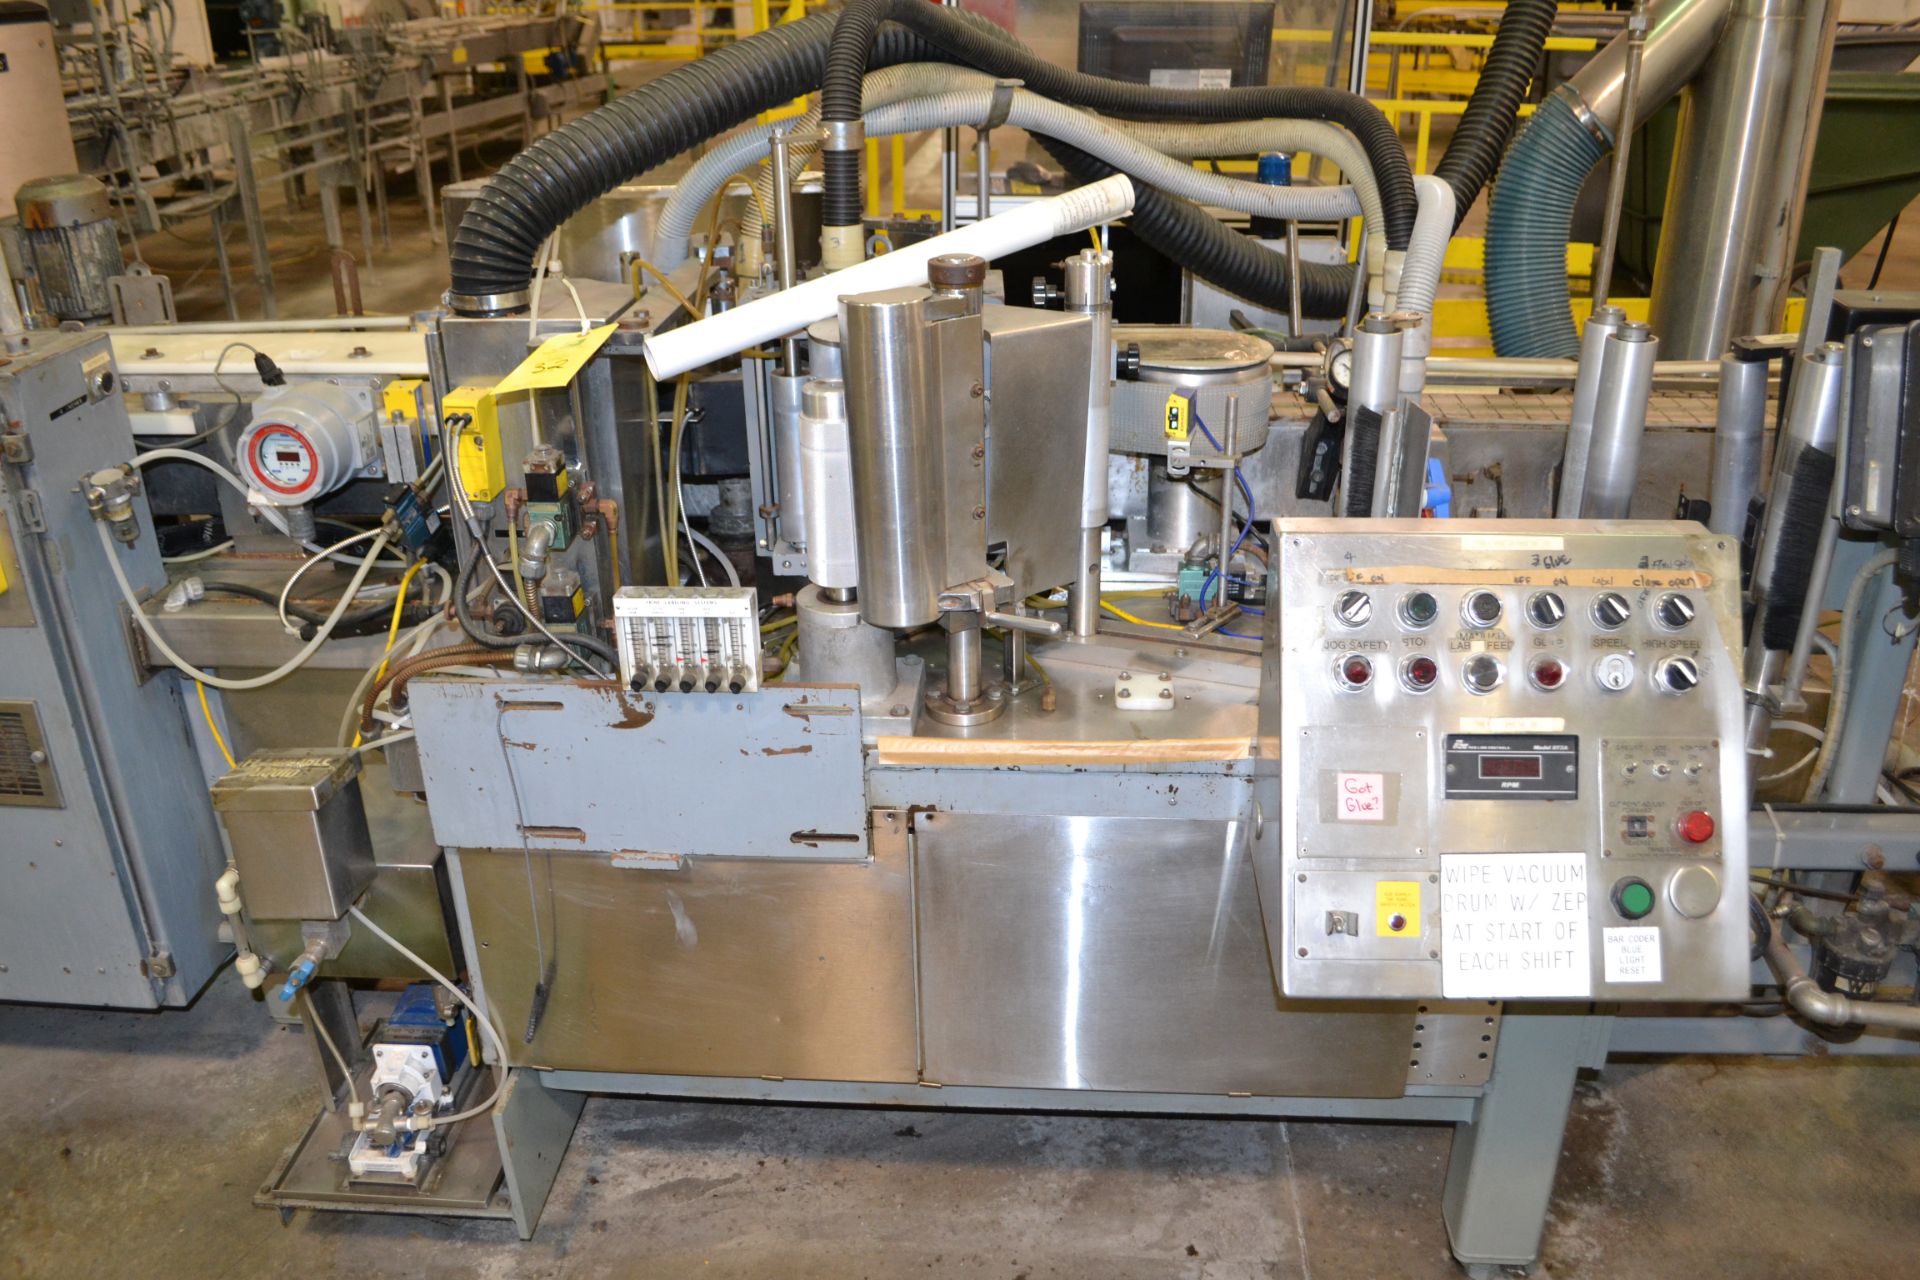 Trine model 5500G/S wraparound plastic film labeler, serial number 2-88-5500-125G/S, set up for a - Image 2 of 5